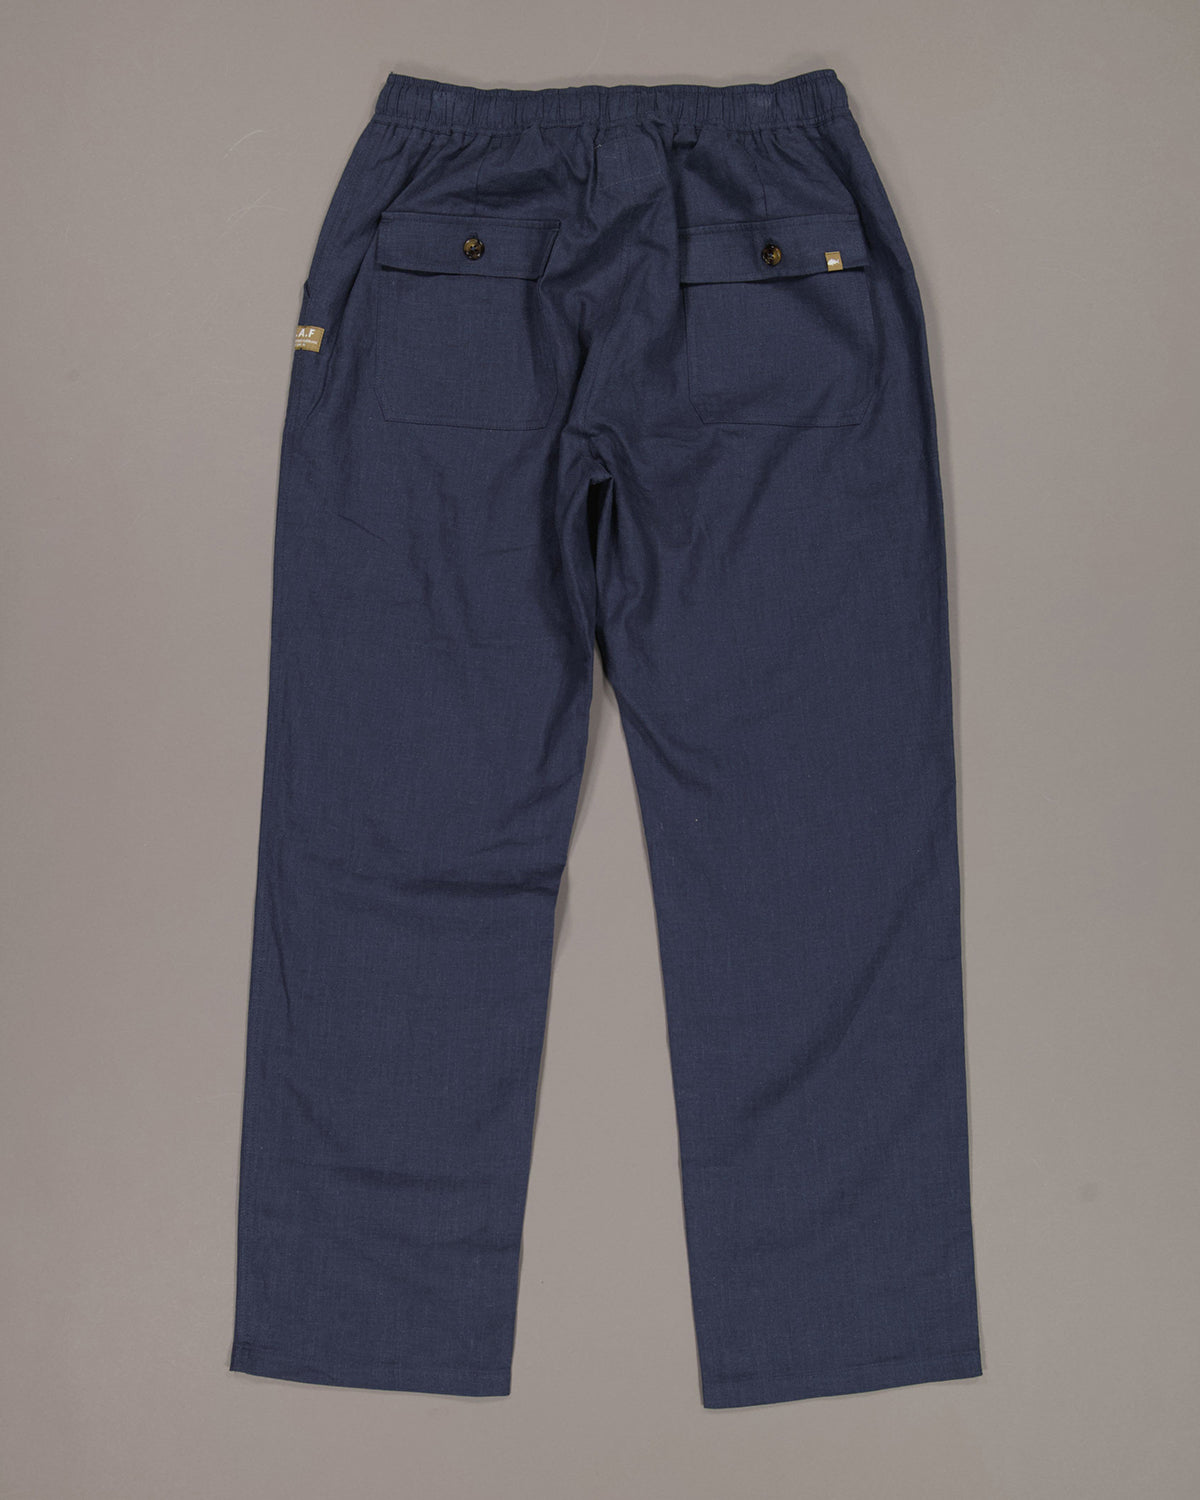 Just Another Fisherman Dinghy Linen Pants - Blue